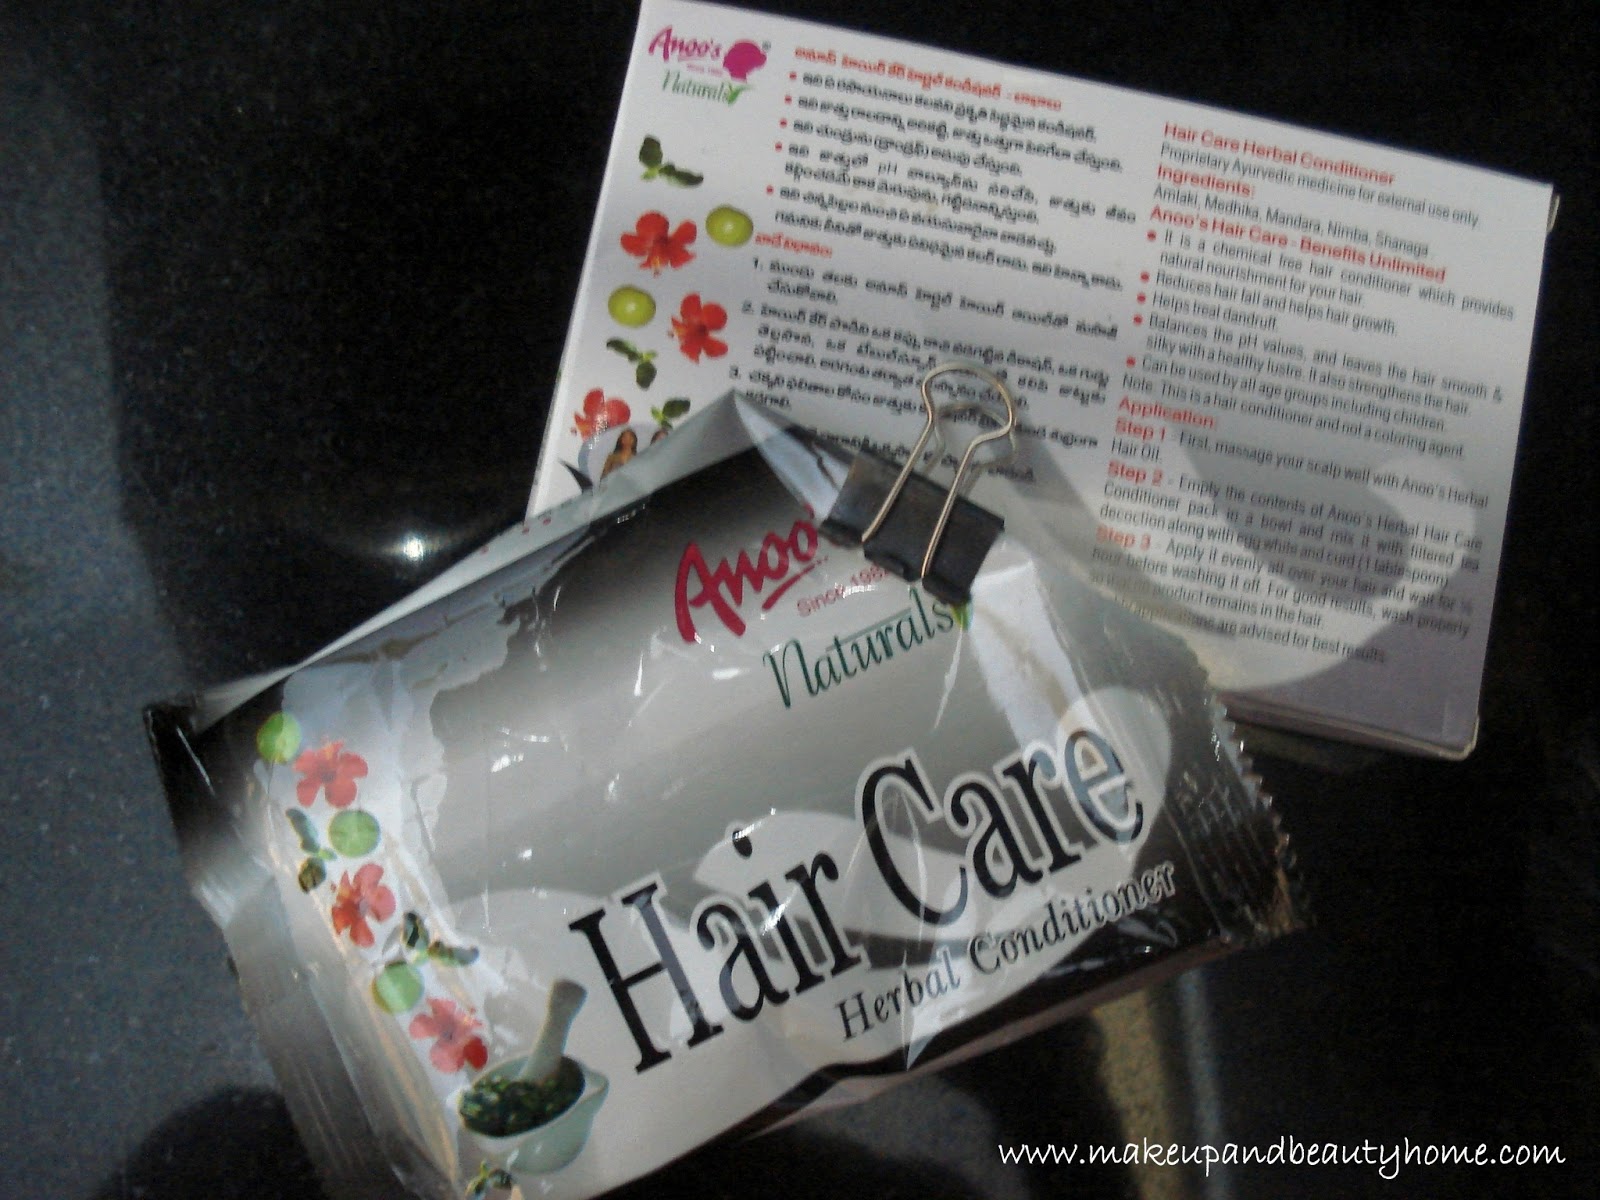 Anoo's Hair Care Herbal Conditioner Review - Blog beauty care | Beauty is  art